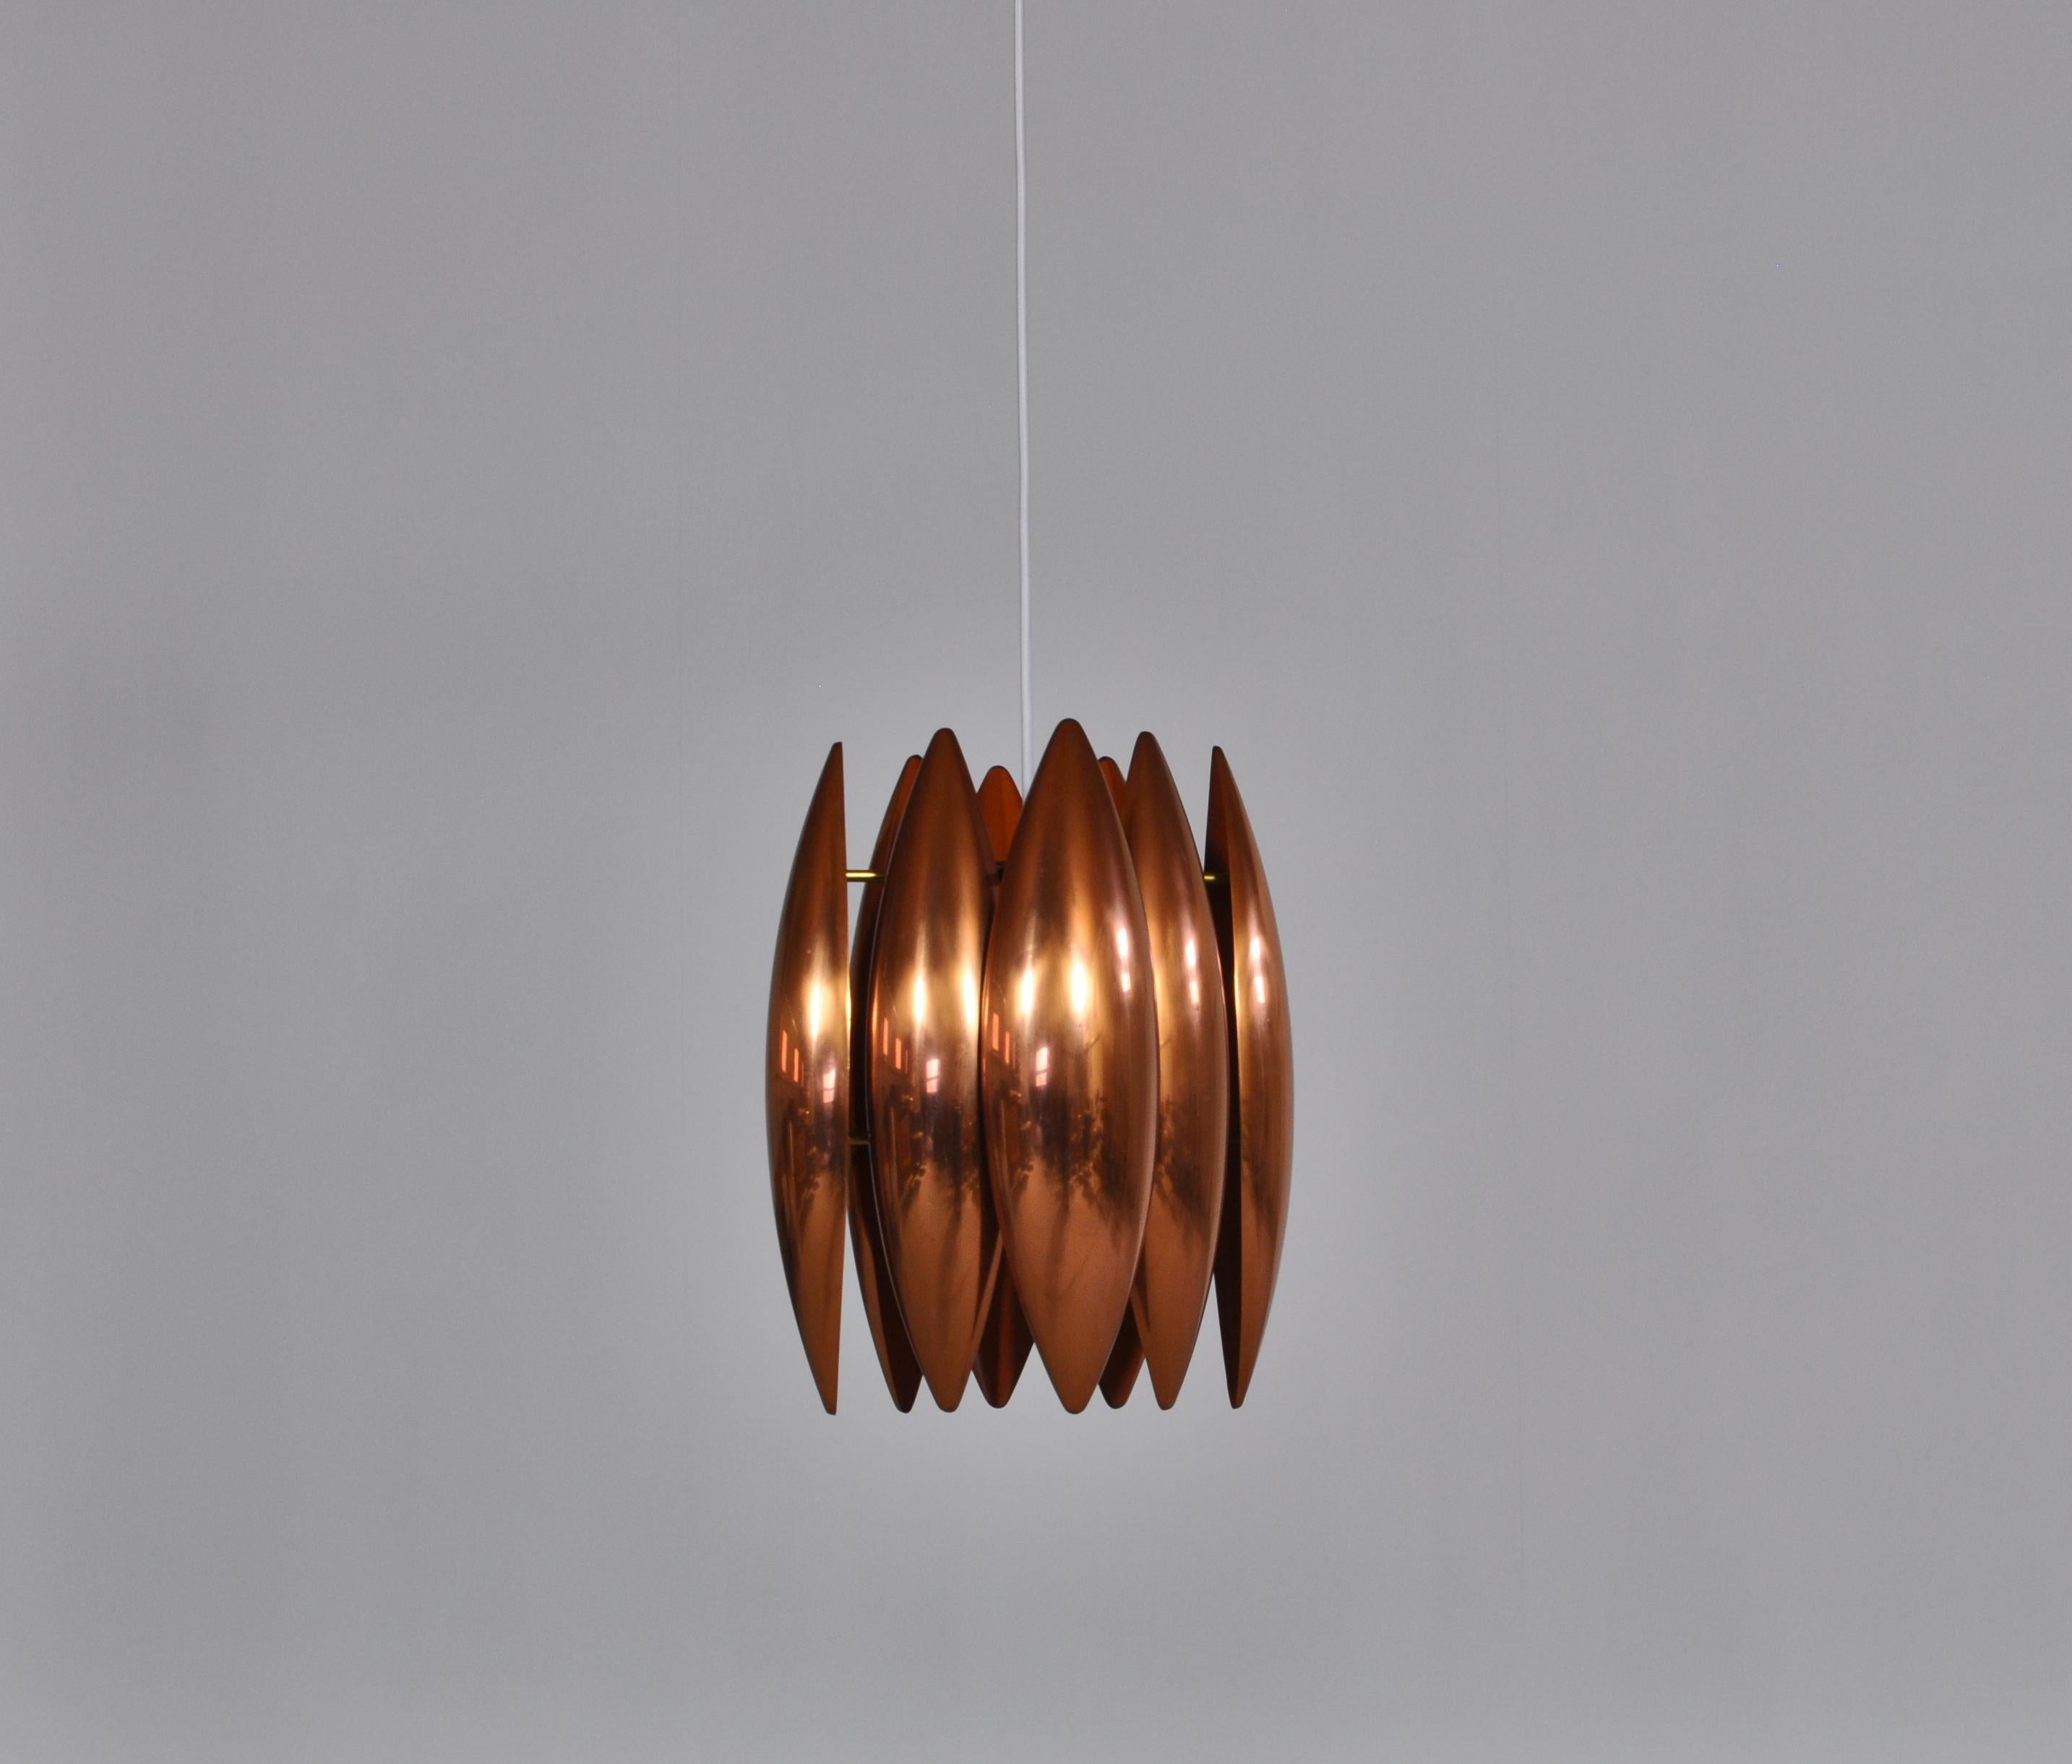 Impressive copper pendant by Danish designer Jo Hammerborg. The lamp was made in the late 1960s for Fog & Mørup, Copenhagen. Hammerborg was educated as a silver smith and this is clearly seen in many of his designs. Brutalism and Danish modern is